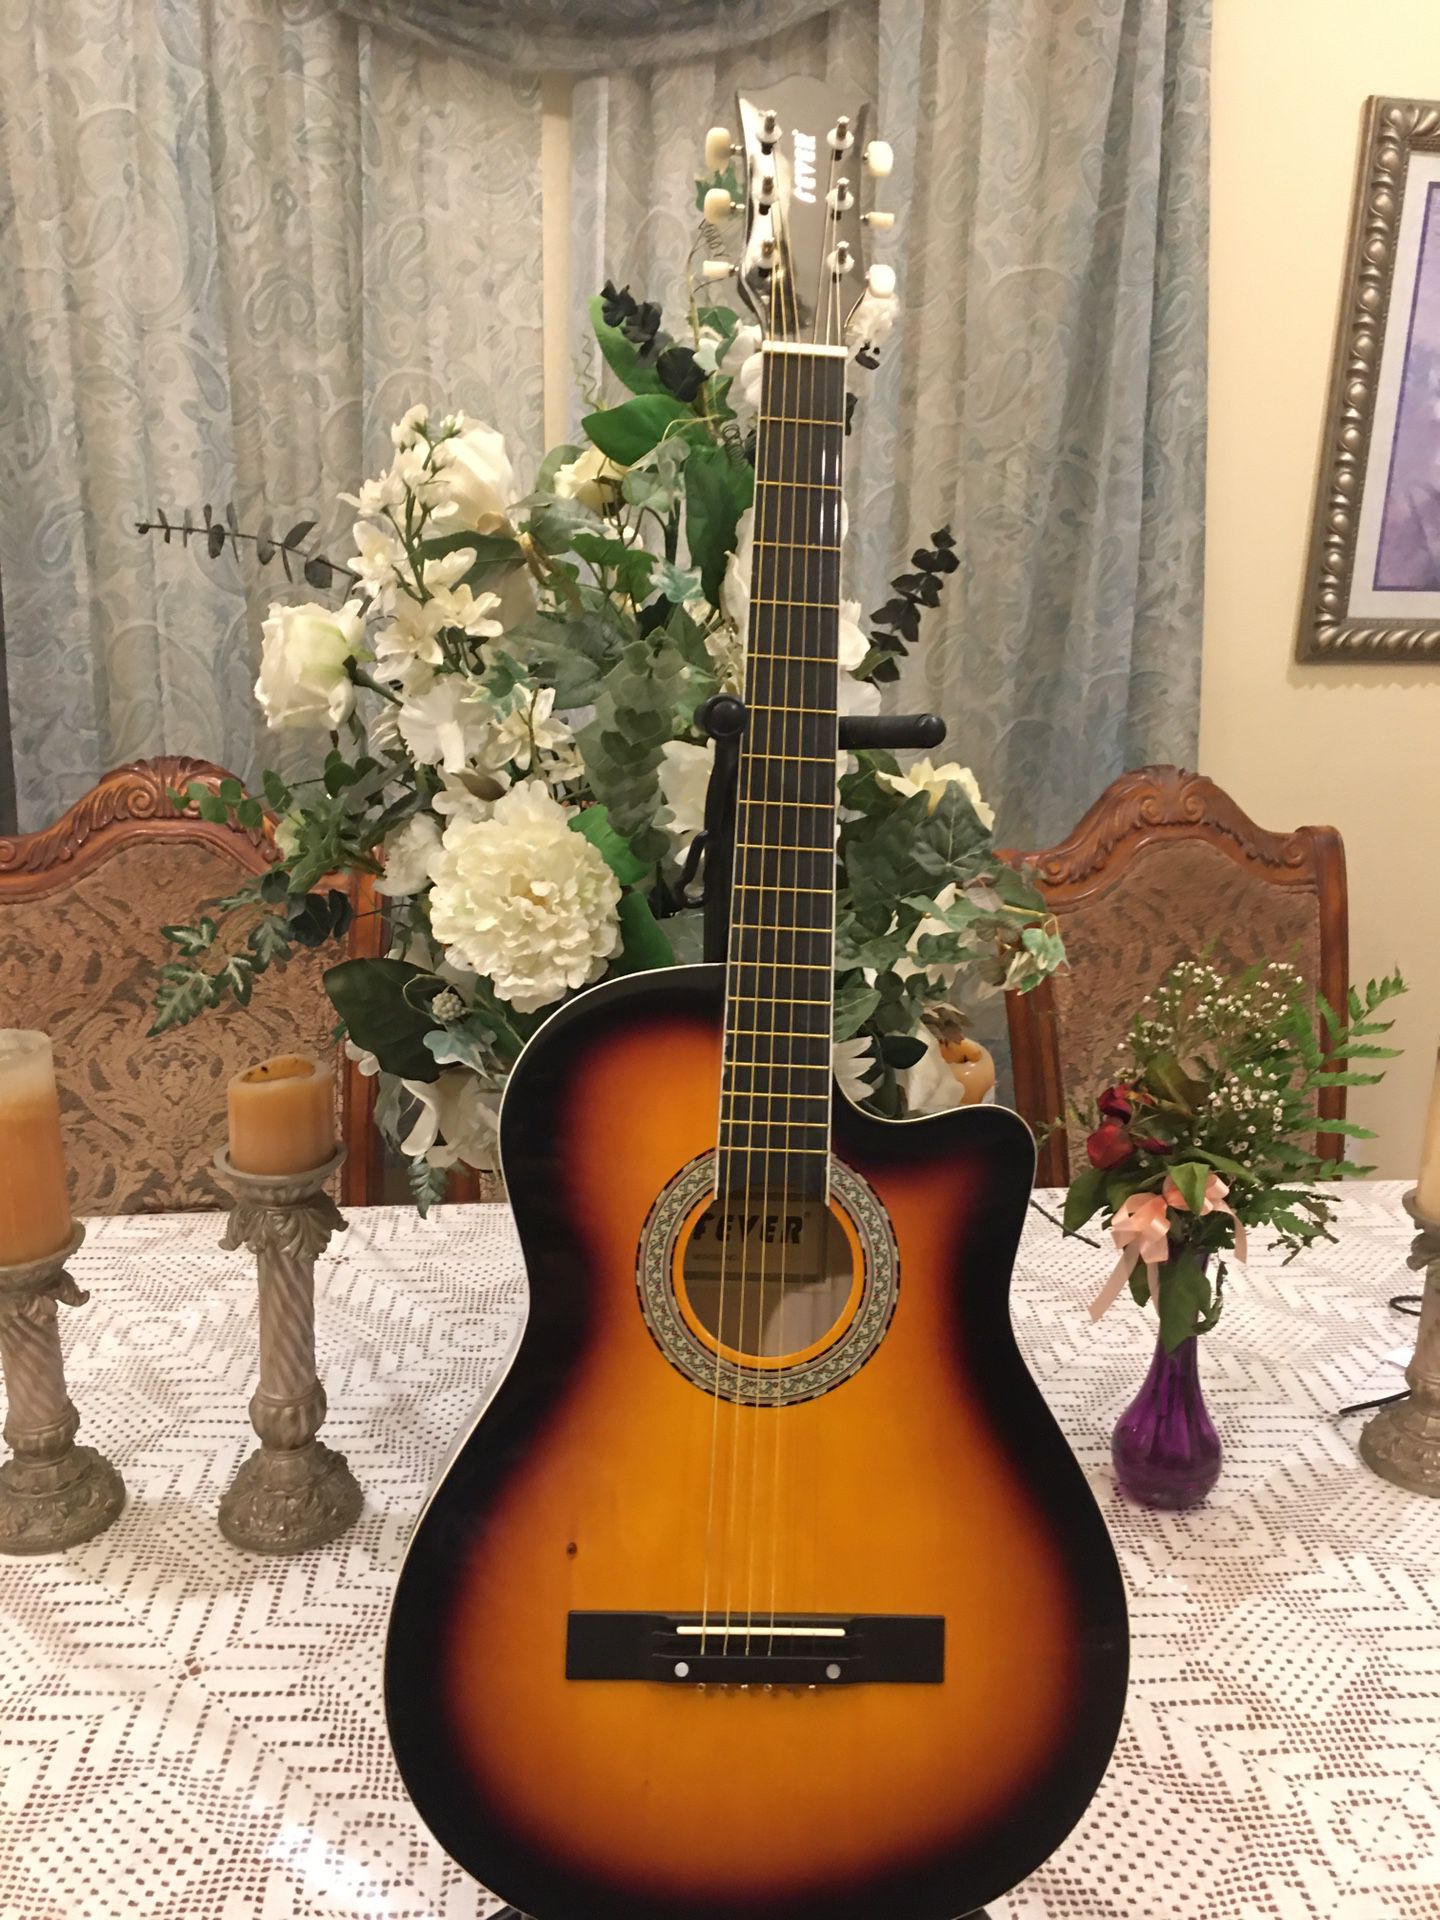 Fever acoustic guitar 3/4 size 38 inches length